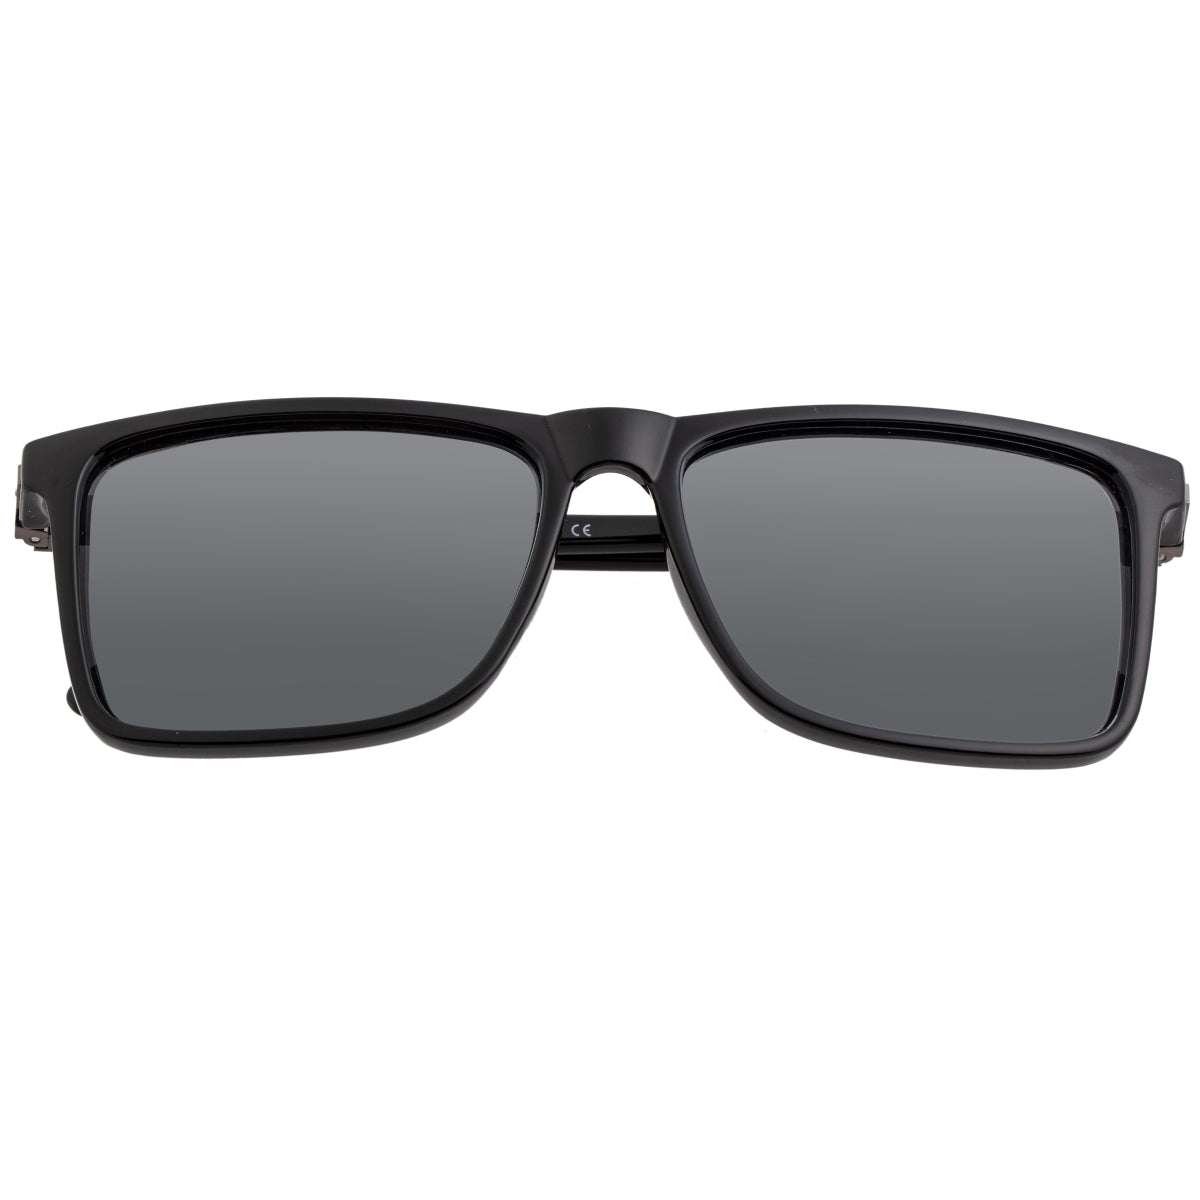 Oakley Frogskins square sunglasses with black lens in black | ASOS